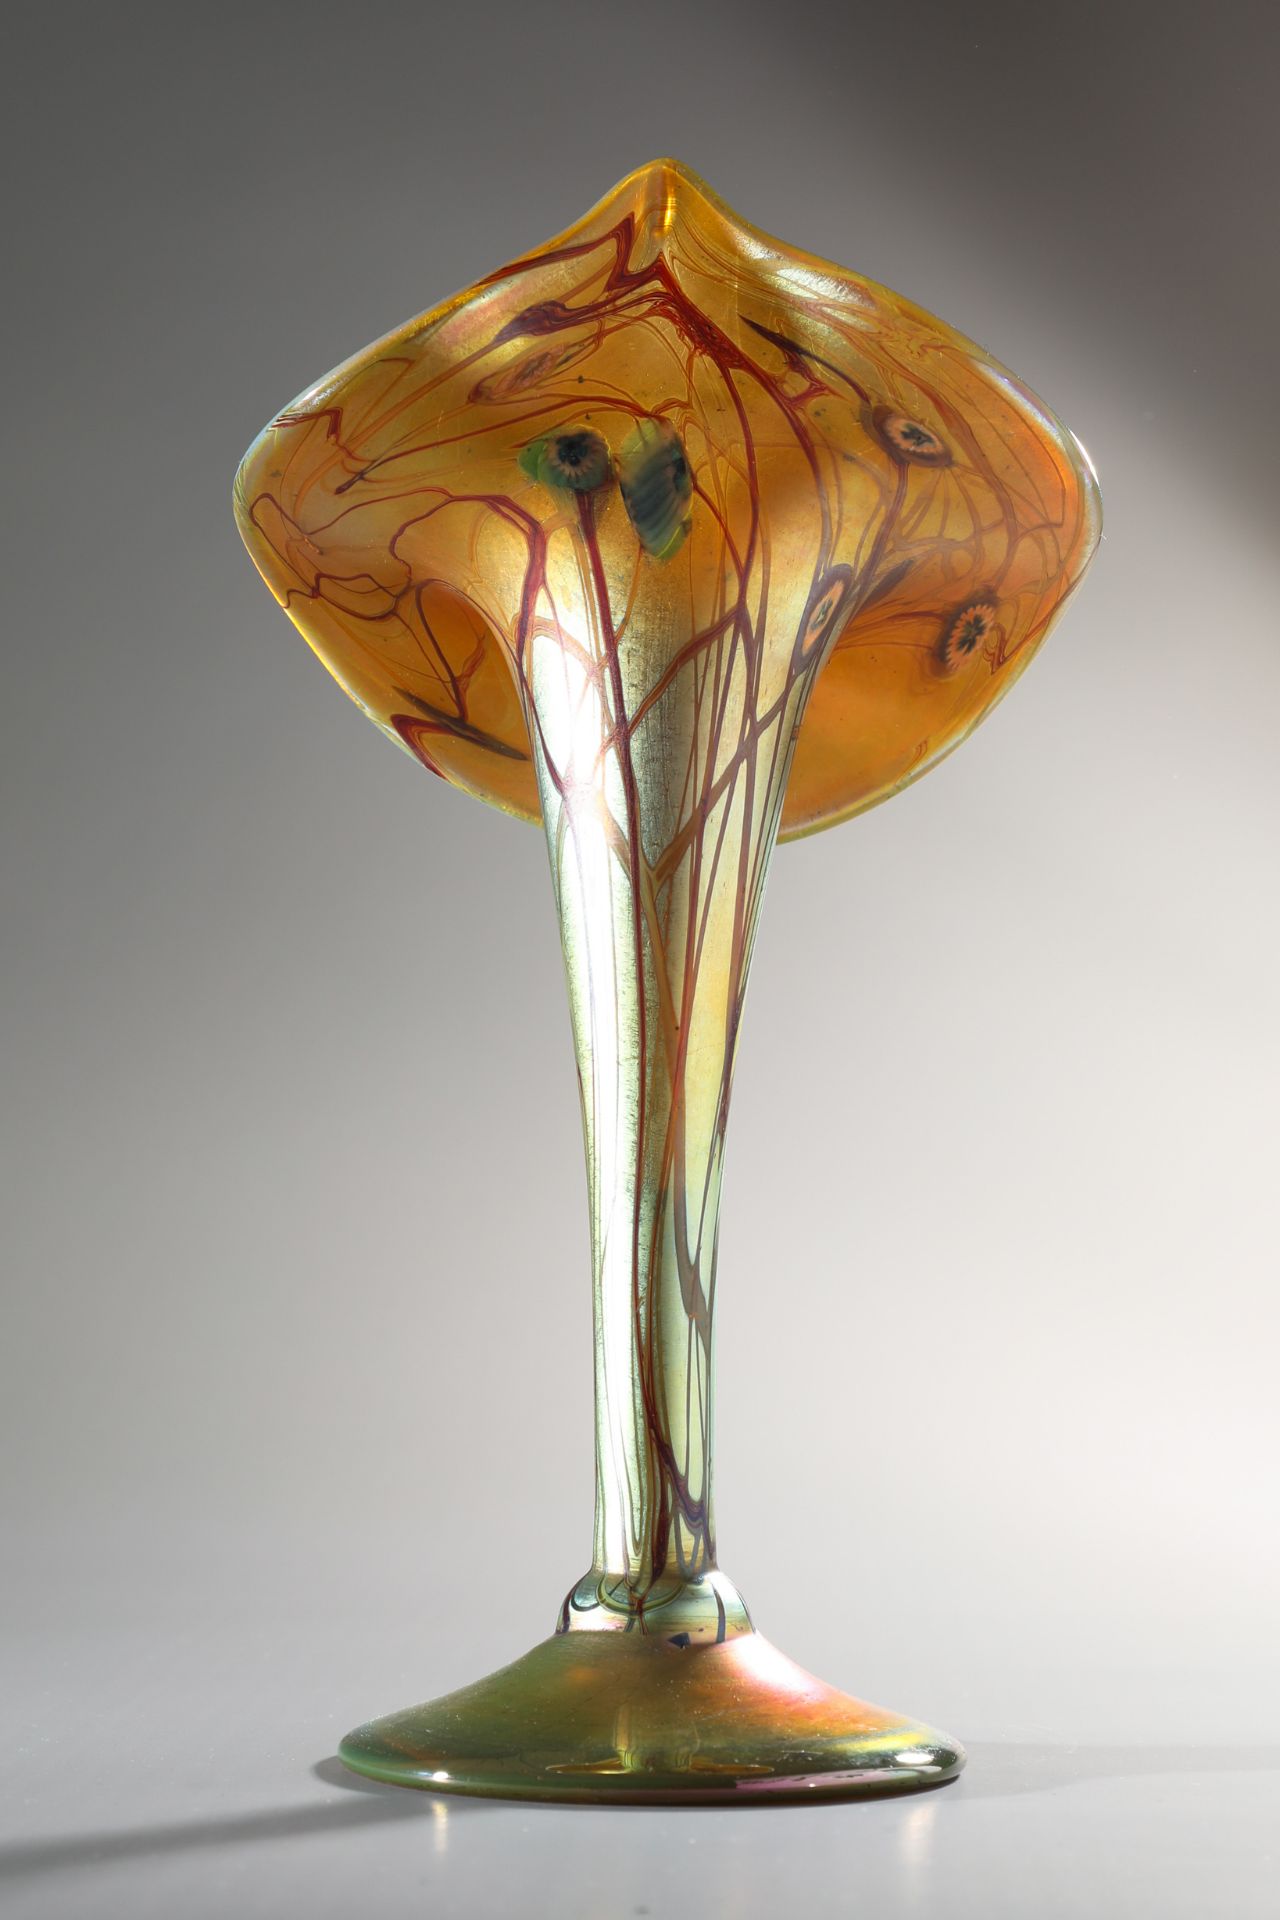 Louis C. Tiffany, Favrile flower cup, around 1904 - Image 5 of 7